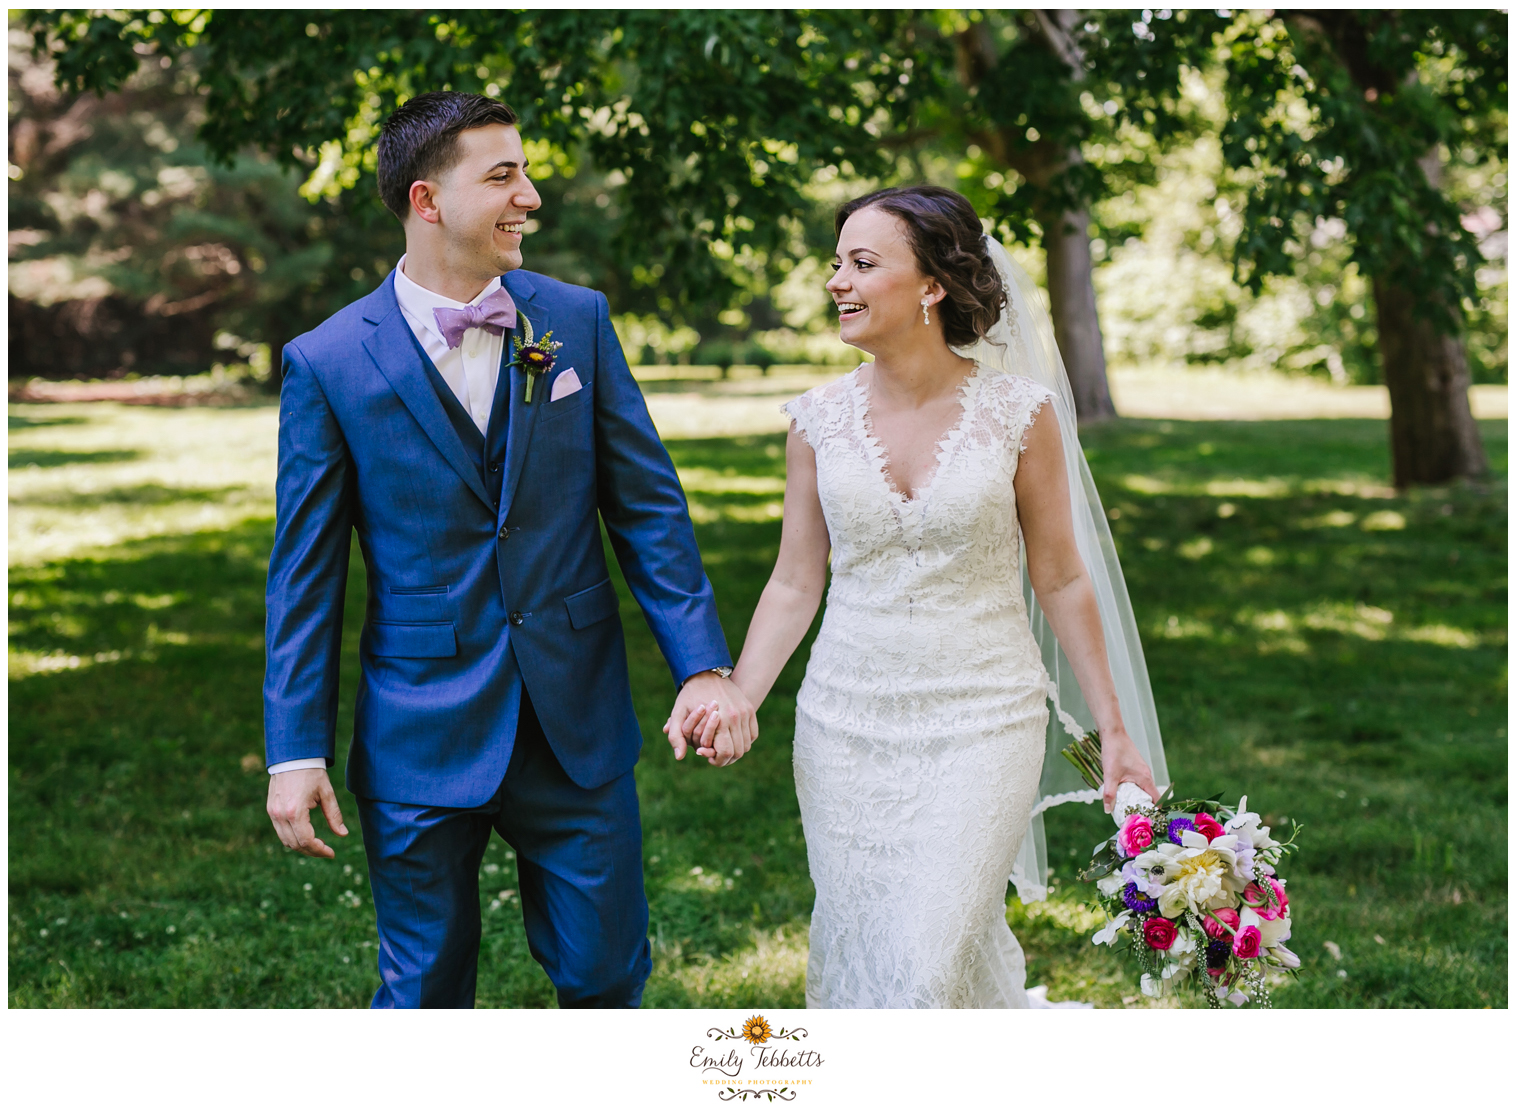 Emily Tebbetts Photography - webb barn wedding wethersfield ct connecticut rustic chic wedding first look fathers day emotional -2.jpg